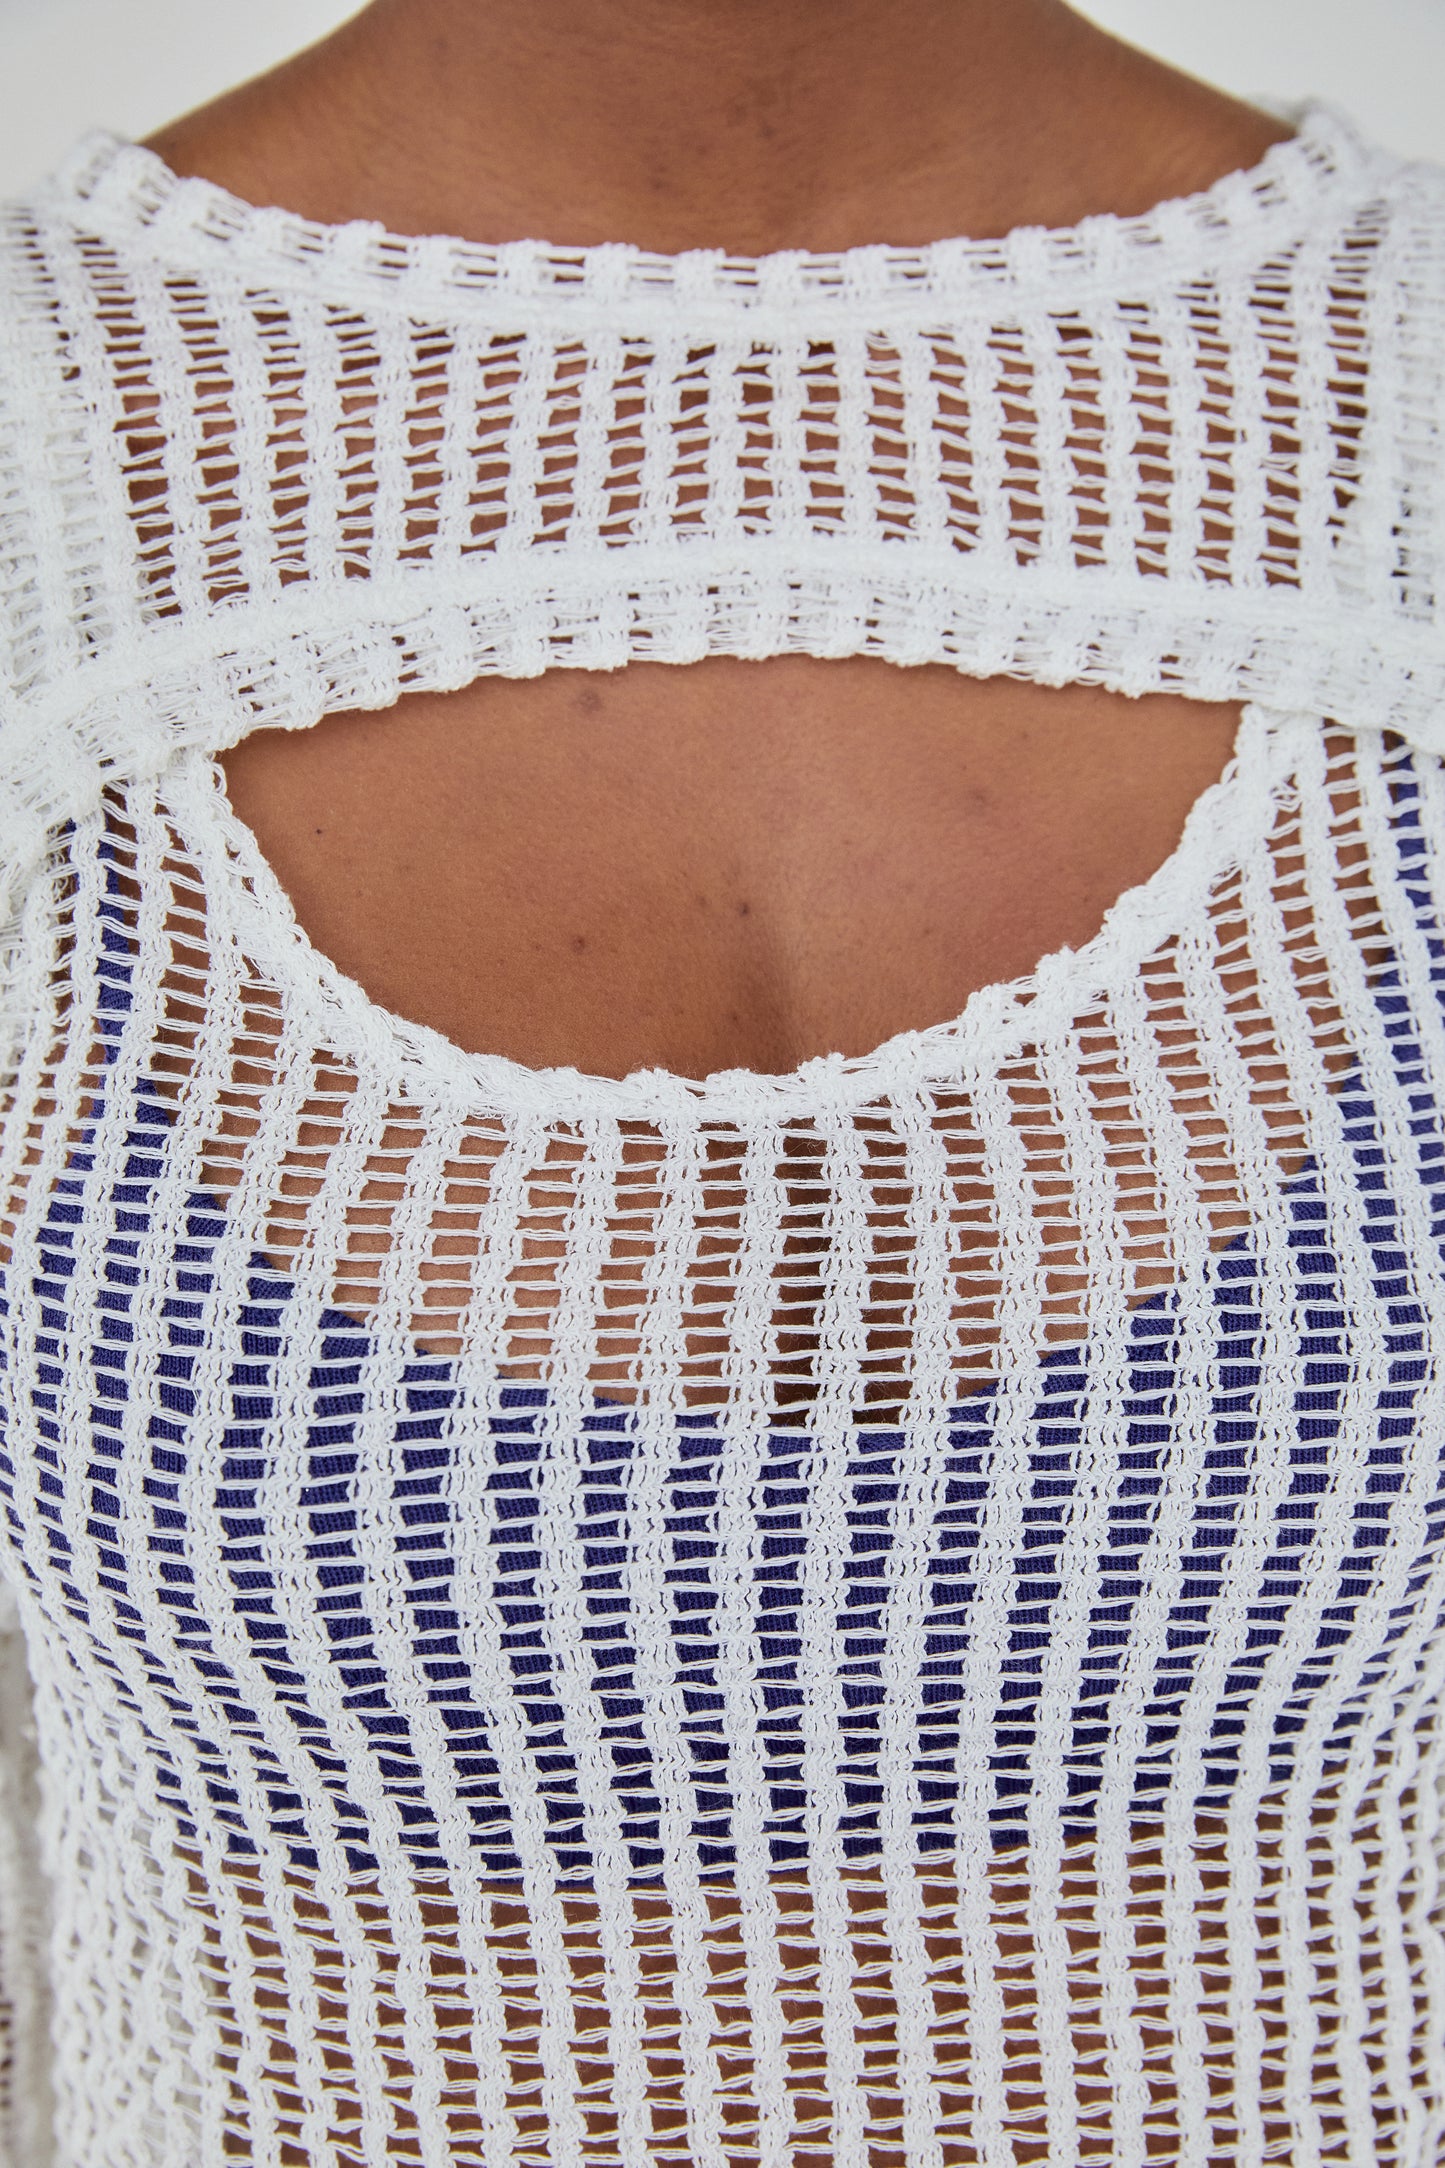 Two Piece Fishnet Sweater, Off White